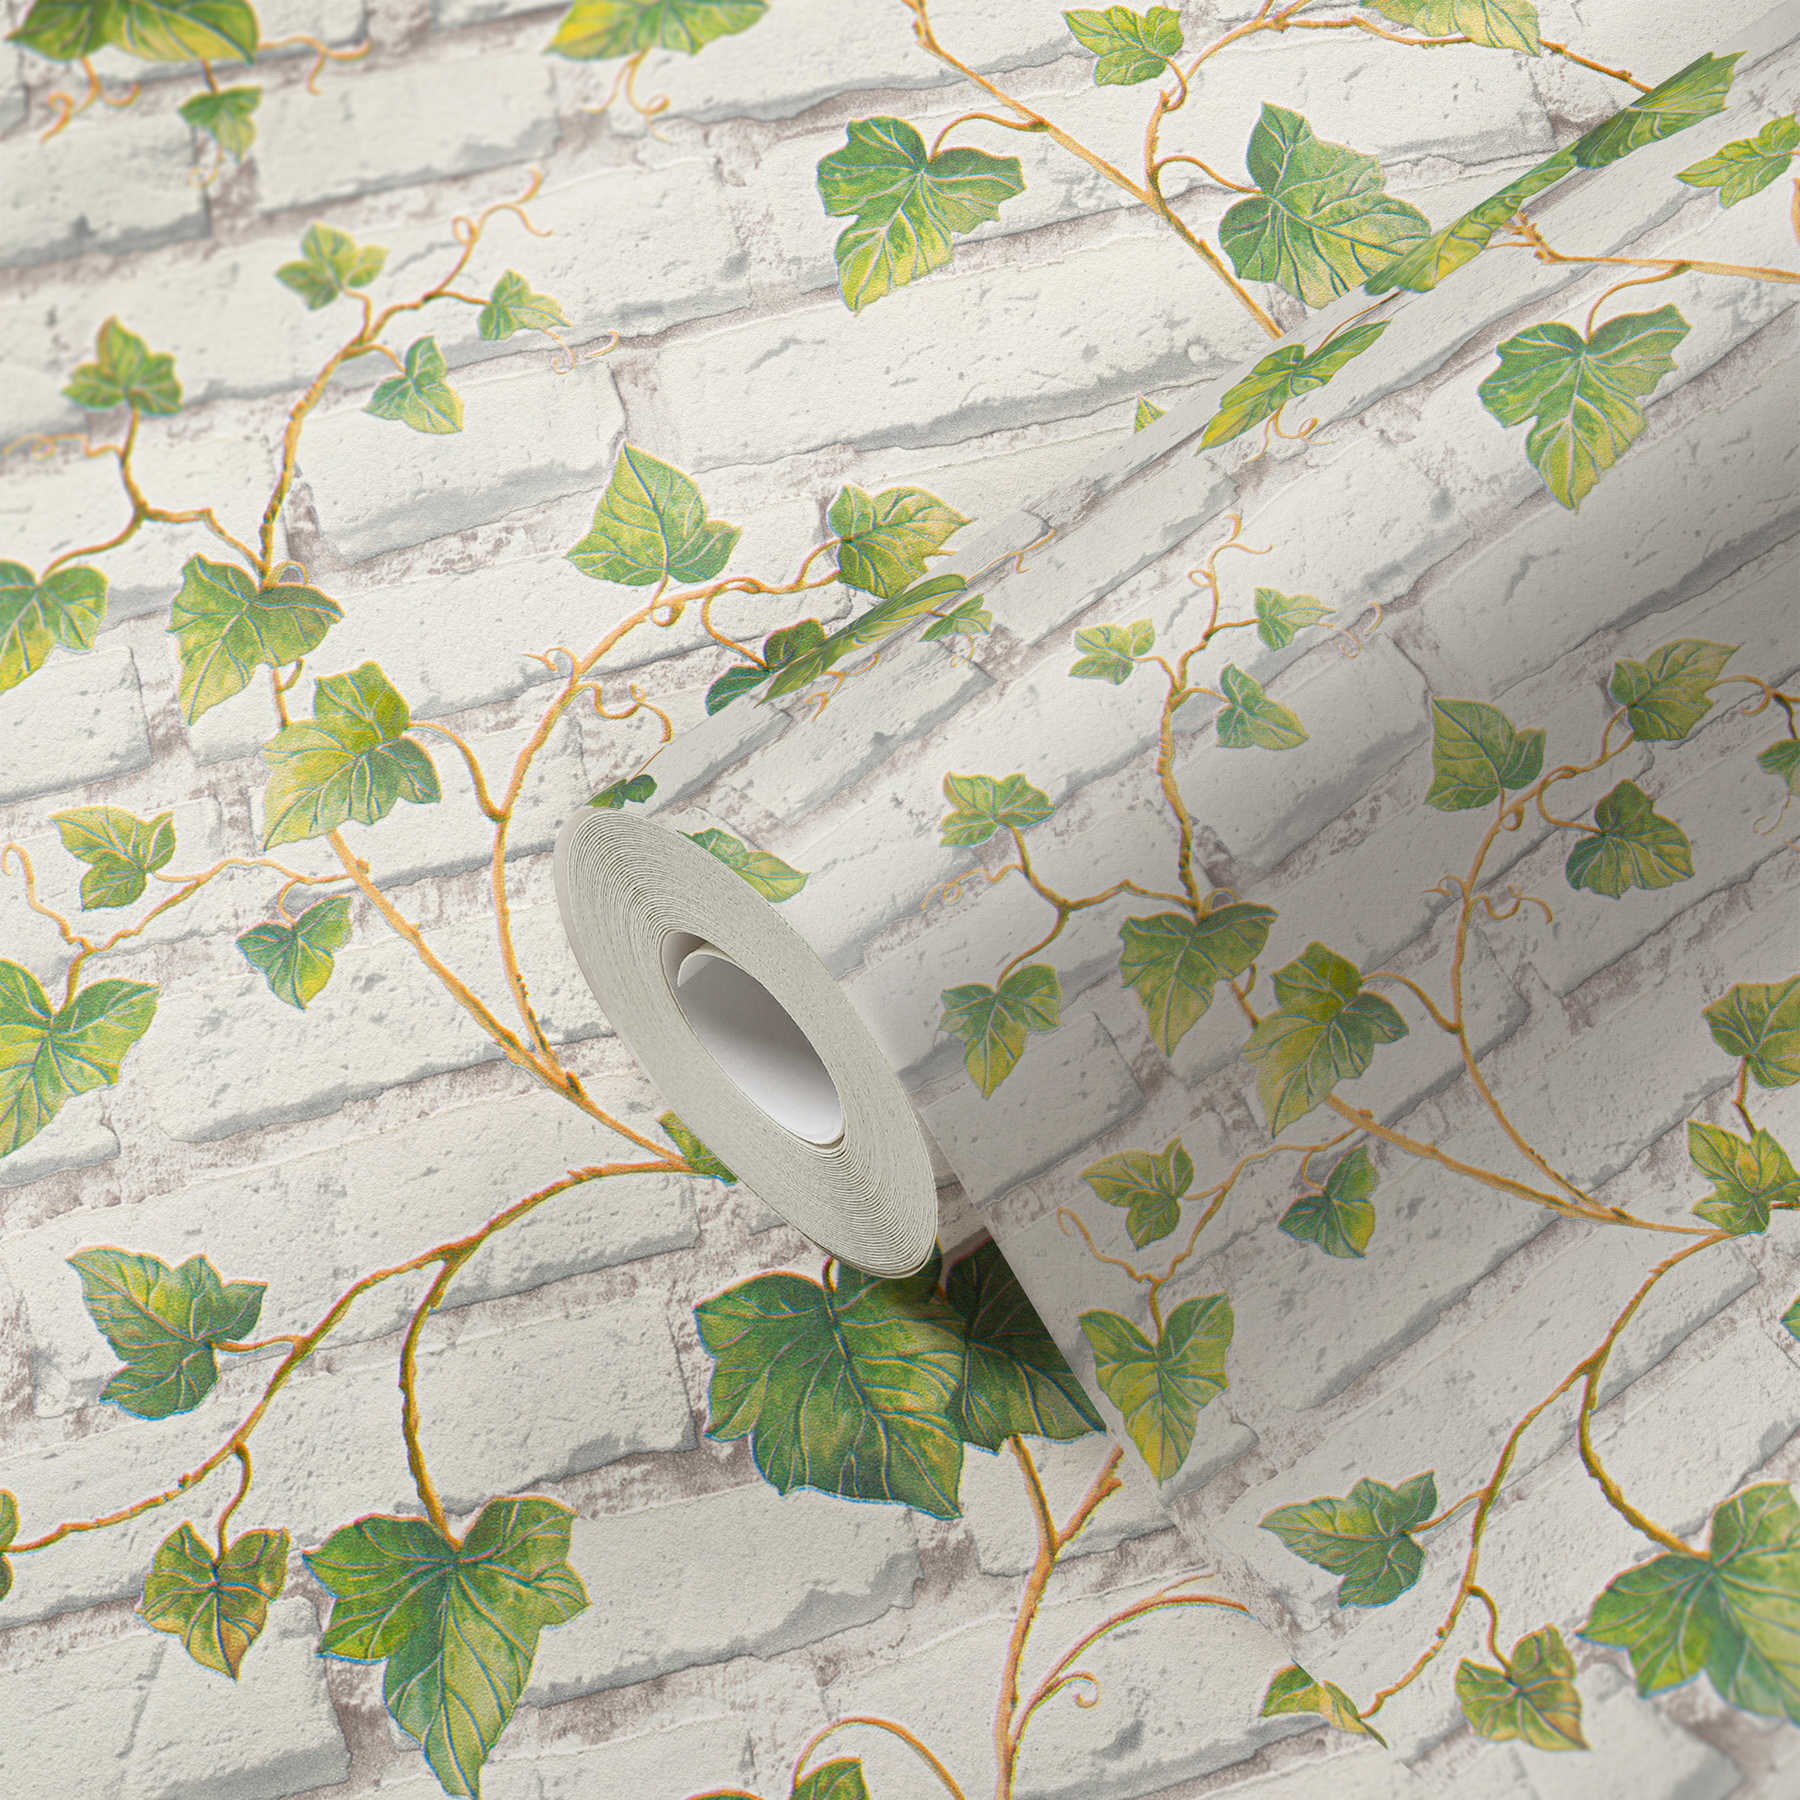             Motif wallpaper with white brick wall and ivy vines - green, white, brown
        